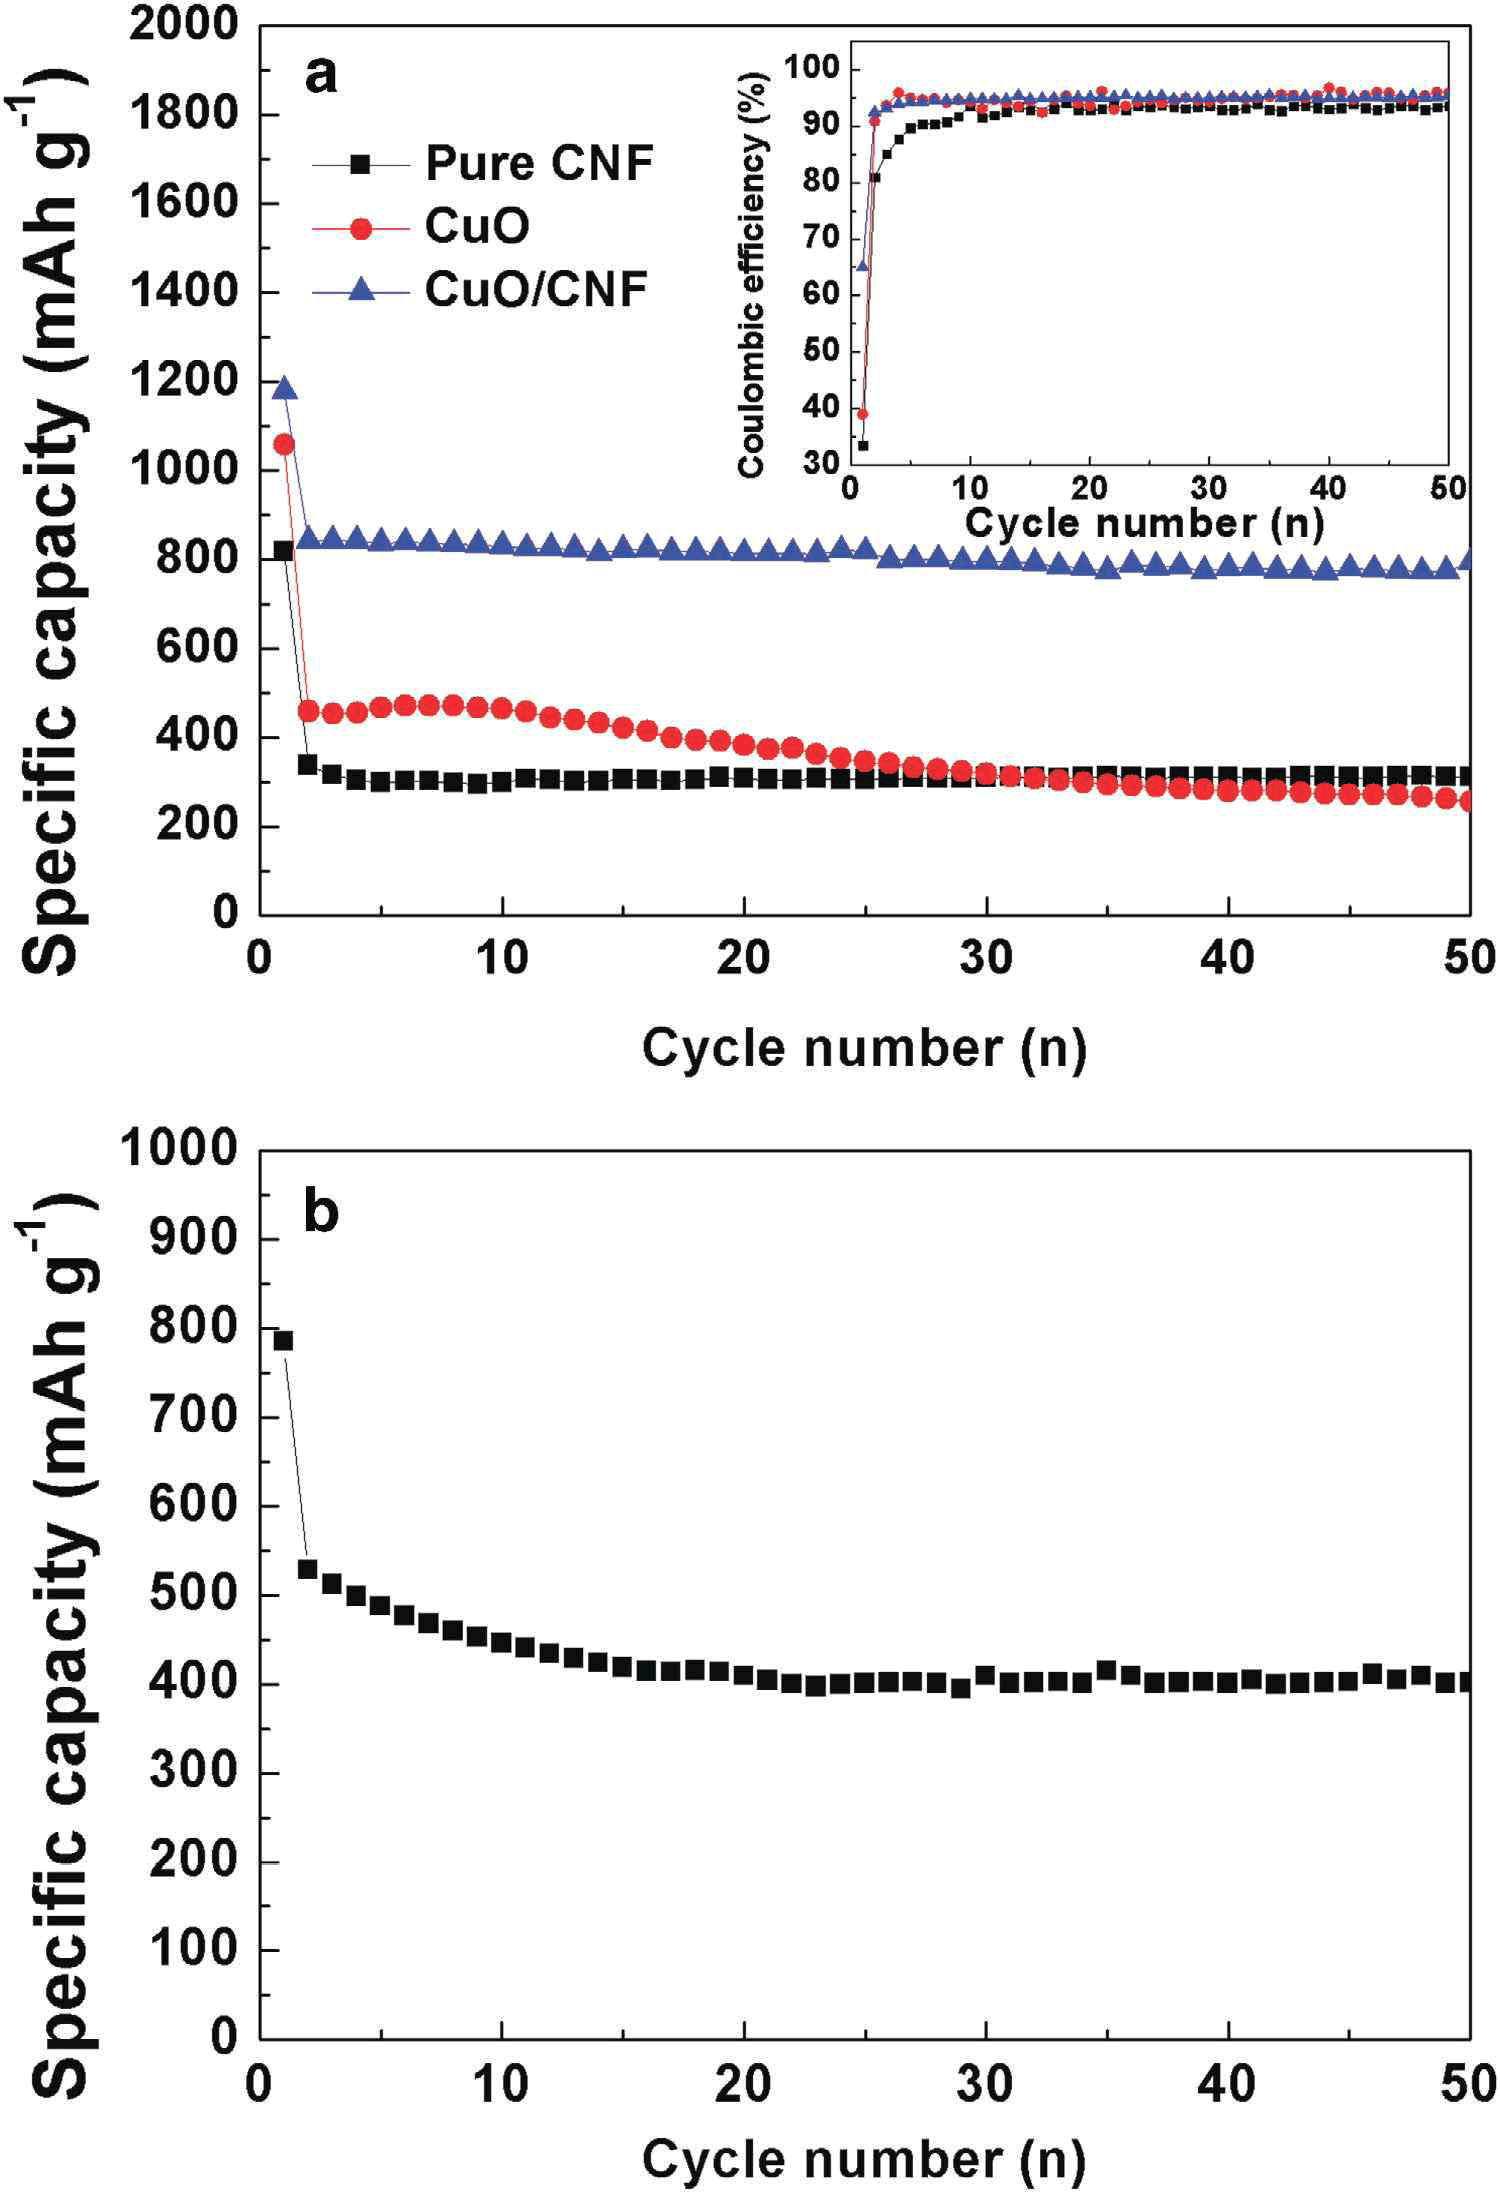 (a) Cycle performance of CNF, CuO, and CuO/CNF at 100 mA g–1, and (b) capacity retention of CuO/CNF at 1000 mA g–1 in 1 M LiPF6/EC/DMC.